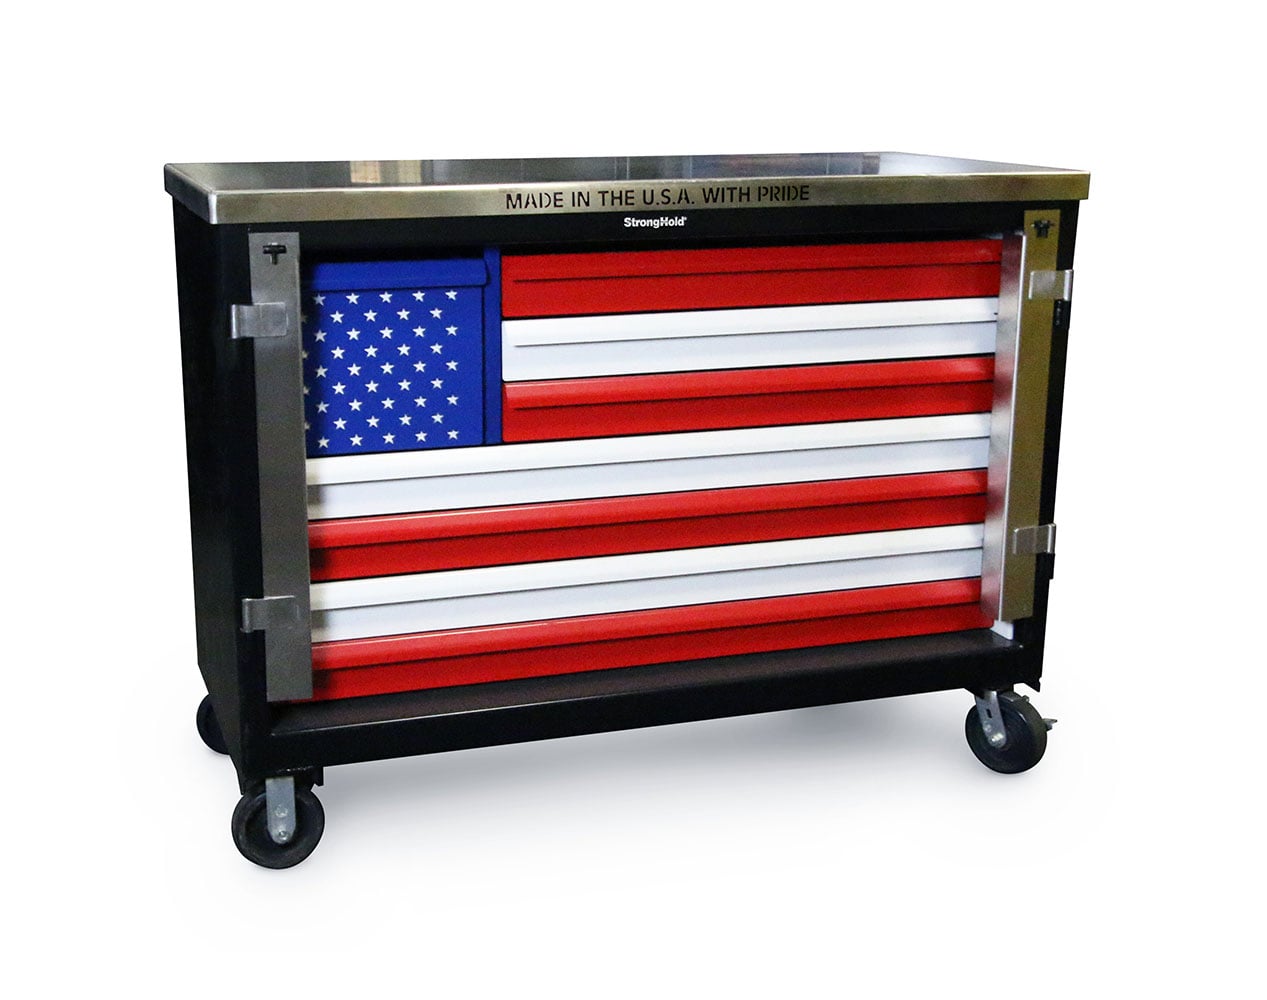 Extreme Duty 12 GA Mobile American Flag Tool Cart with Stainless Steel Top, 8 Drawers, Lockbar - 60 in. W x 24 in. D x 44 in. H